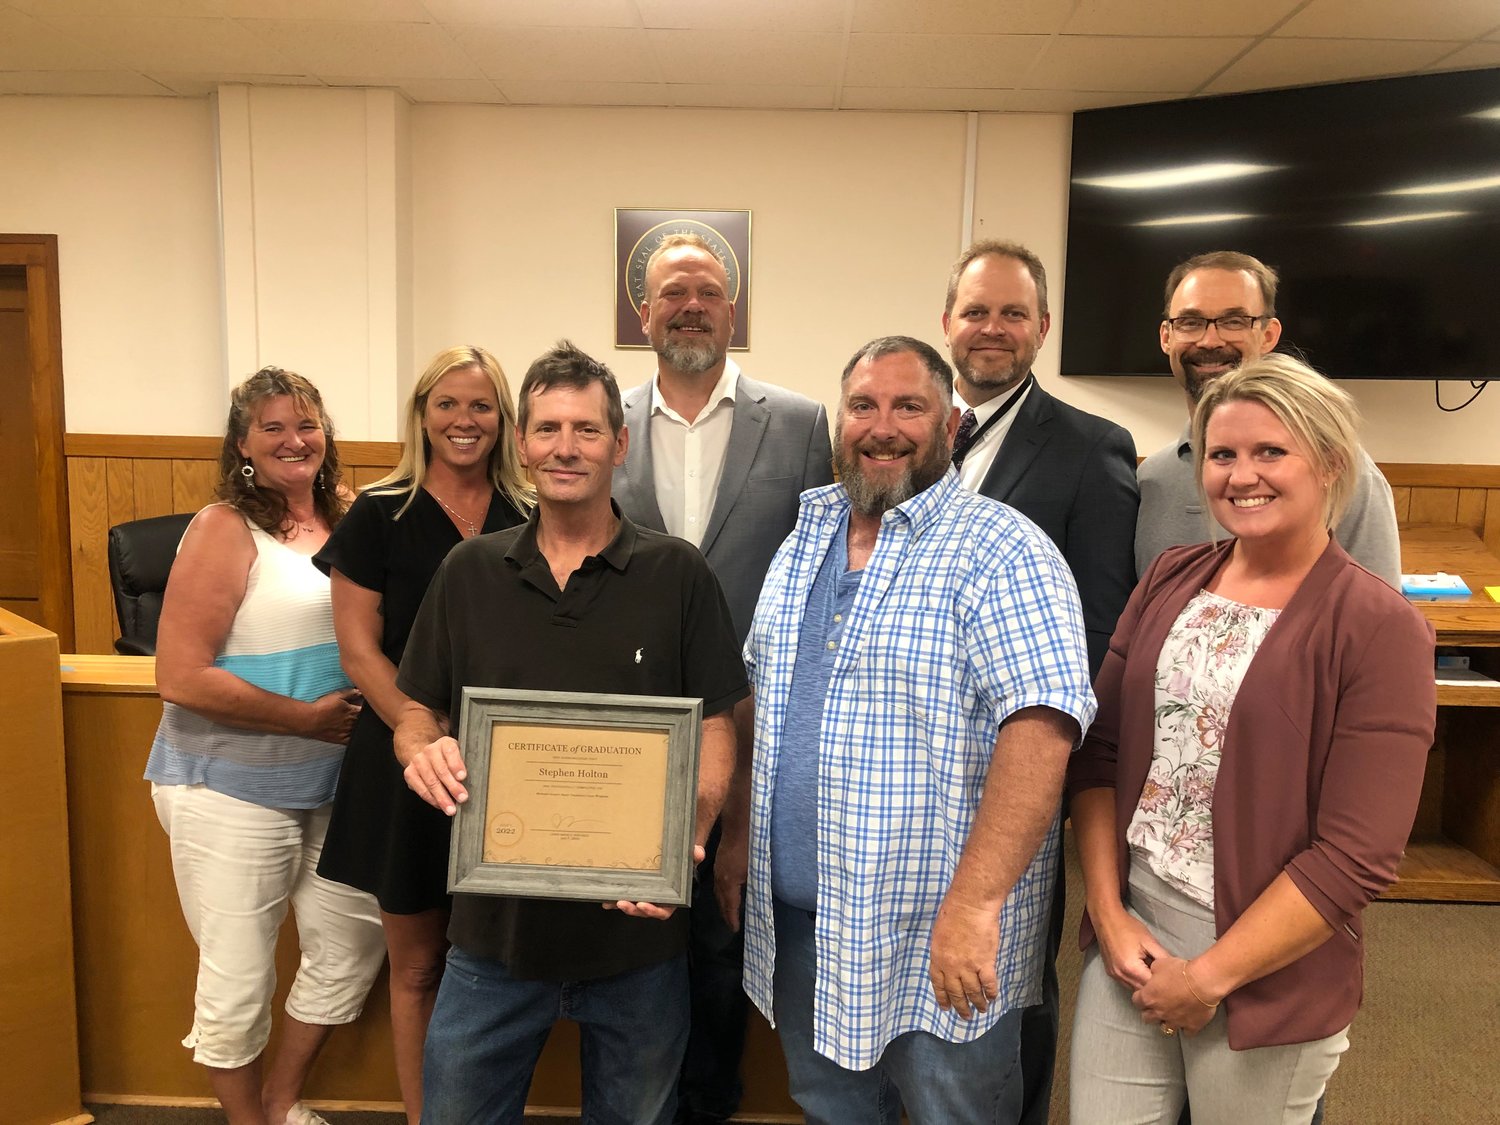 There are more than 4,800 participants currently enrolled in Drug Court in the State of Missouri, including 22,000 graduates. One of those graduates include Stephen Holton (holding frame) who graduated July 7 at the Webster County Courthouse.